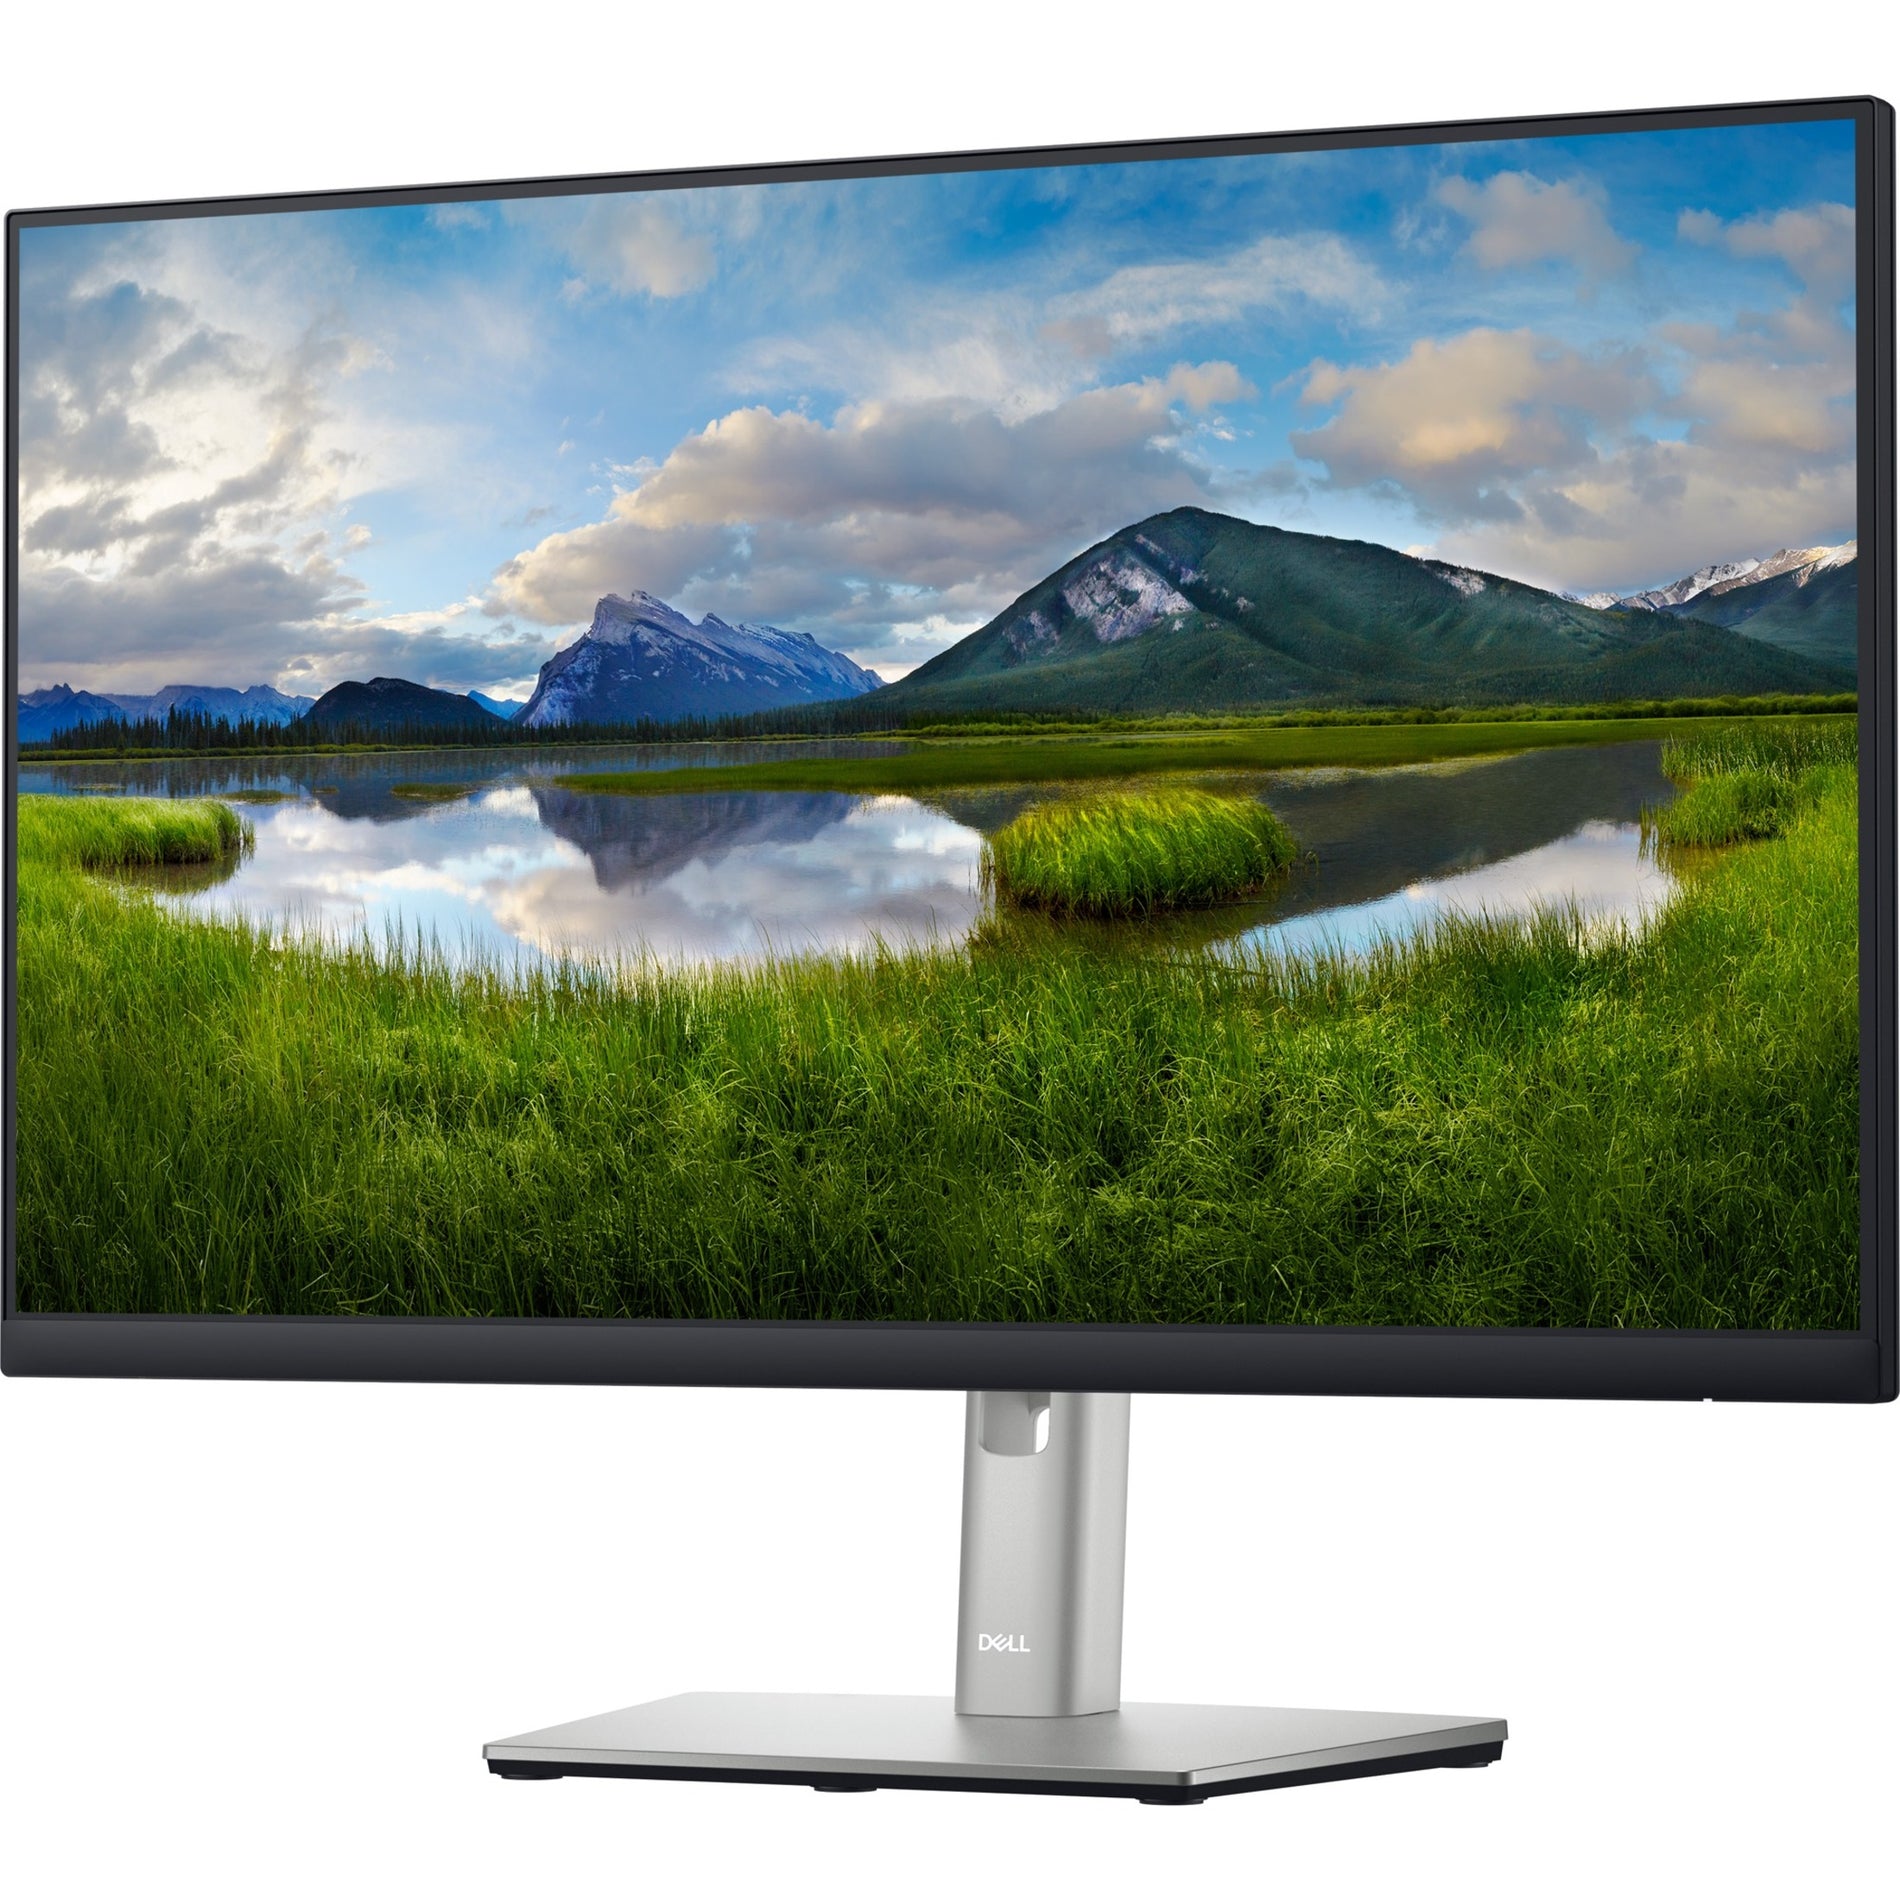 Dell DELL-P2422H P2422H LCD Monitor, 23.8" Full HD, 1920 x 1080, IPS Technology, Silver, Black